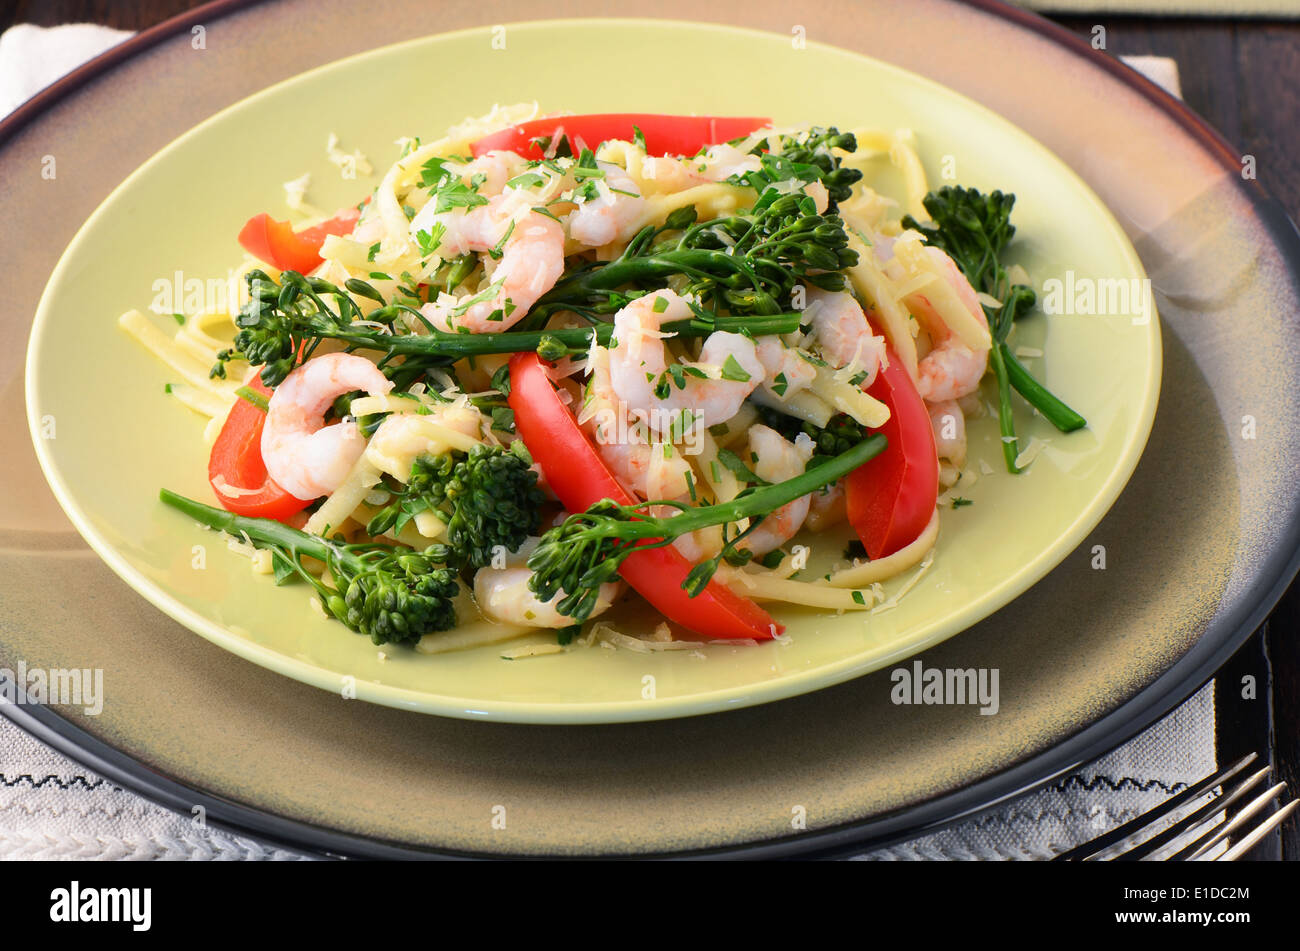 Linguine with shrimp, broccolini and red peppers on a wooden surface Stock Photo